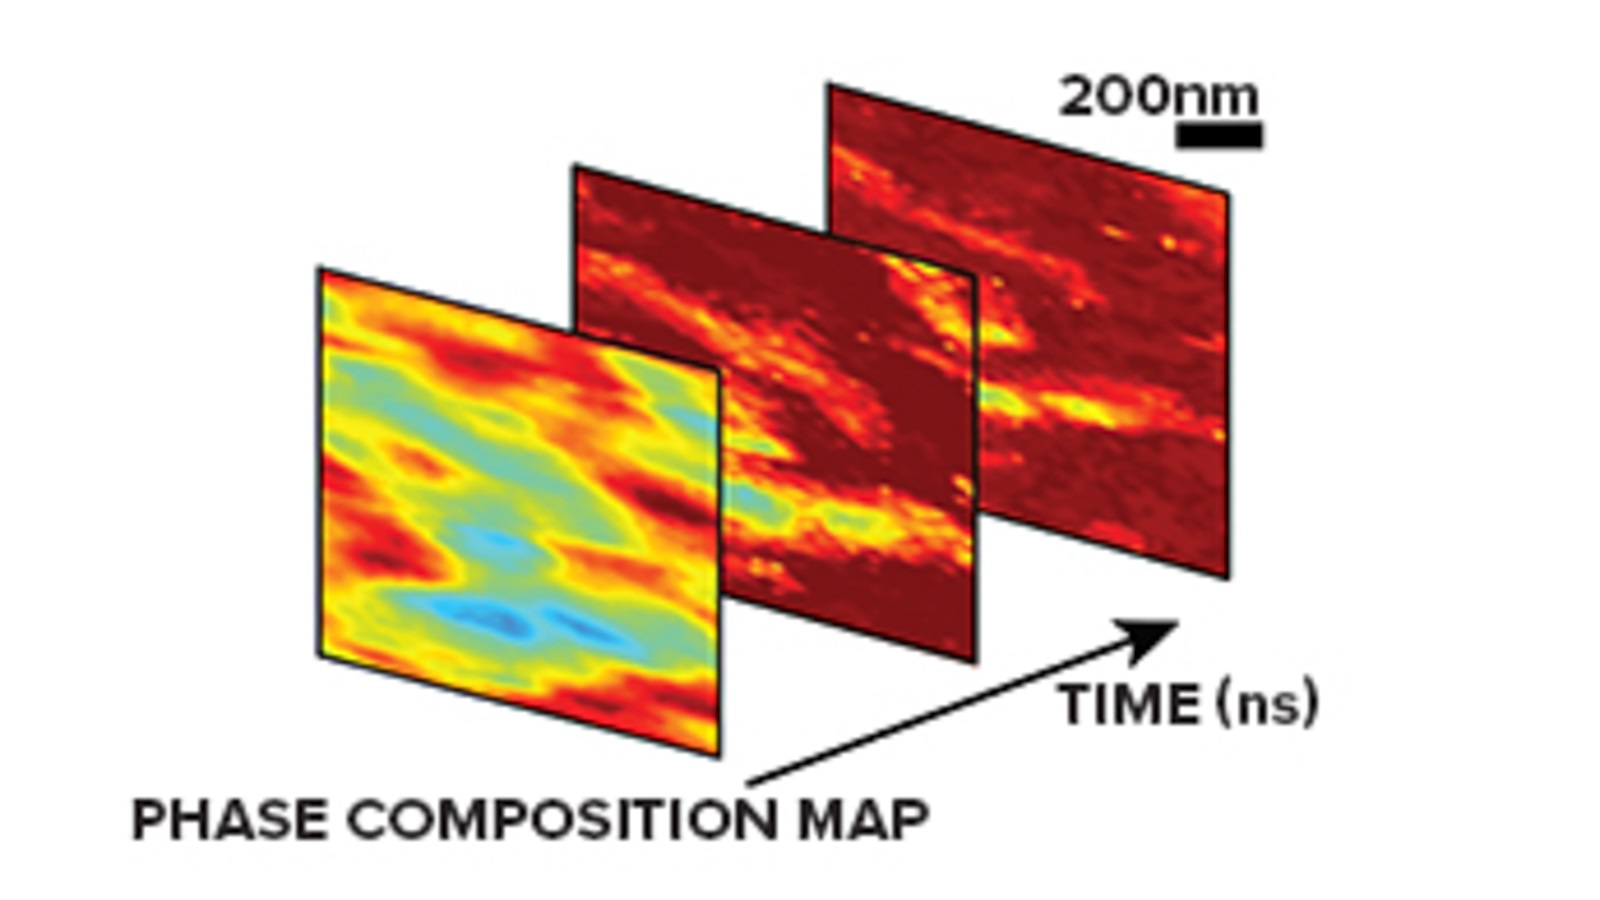 Rendition of three panels of Phase Composition Map in time (ns) to 200 nm. (Image by Haidan Wen/Argonne National Laboratory.)